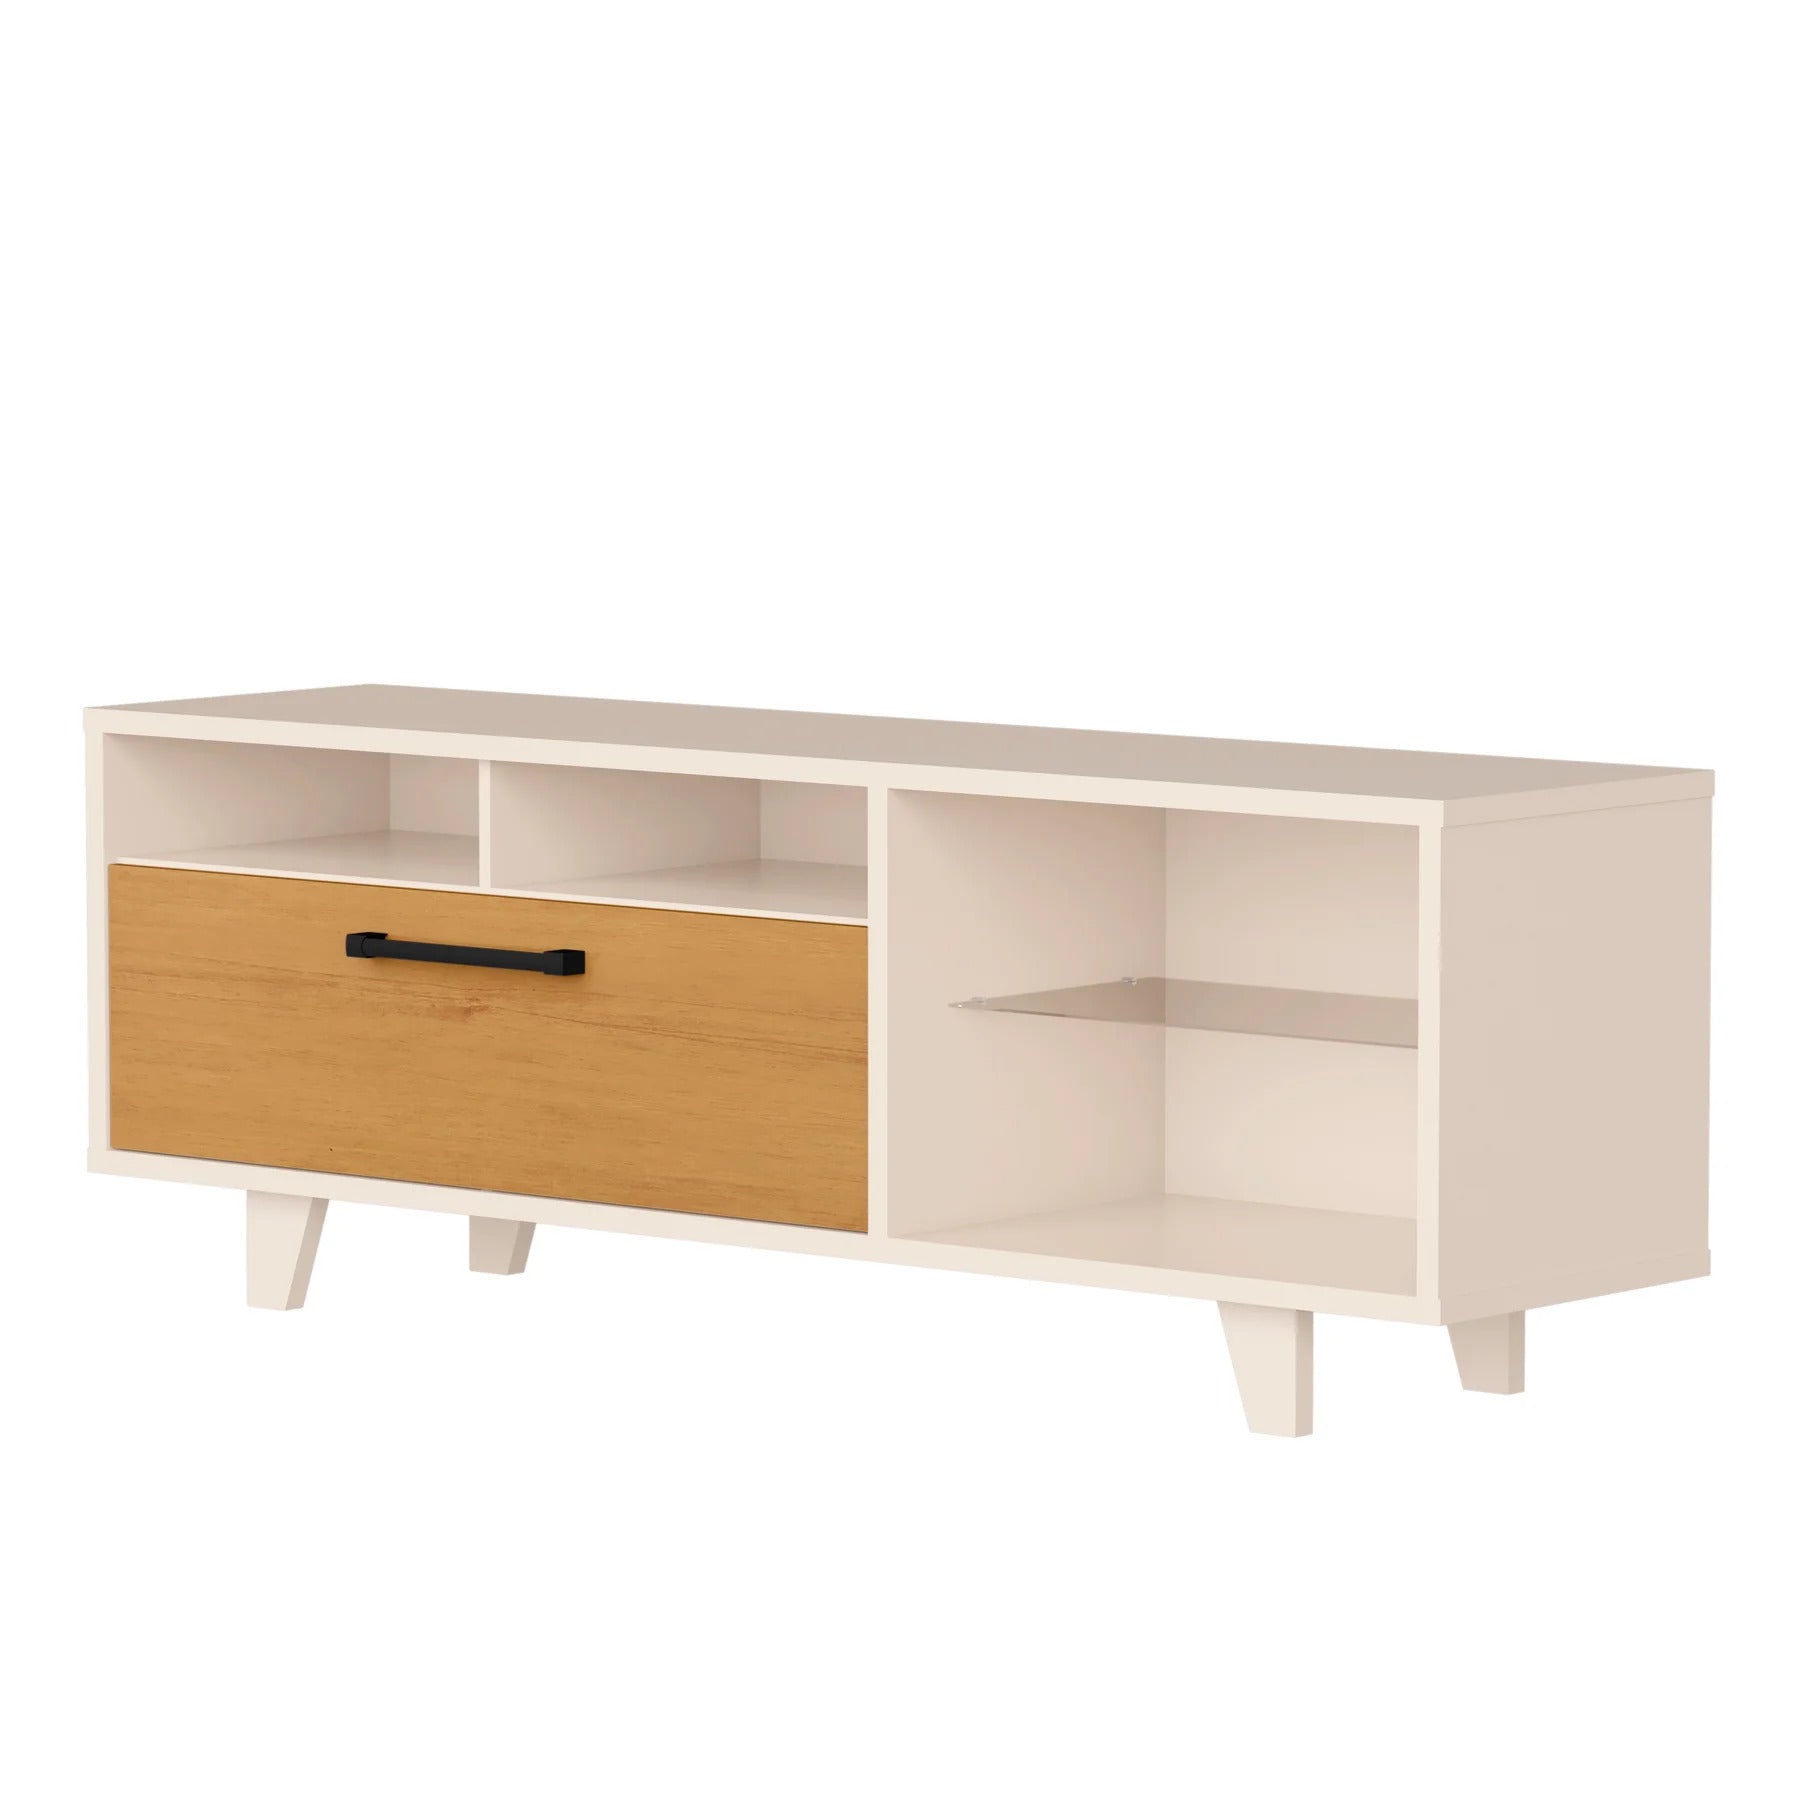 71" Off White Open shelving TV Stand